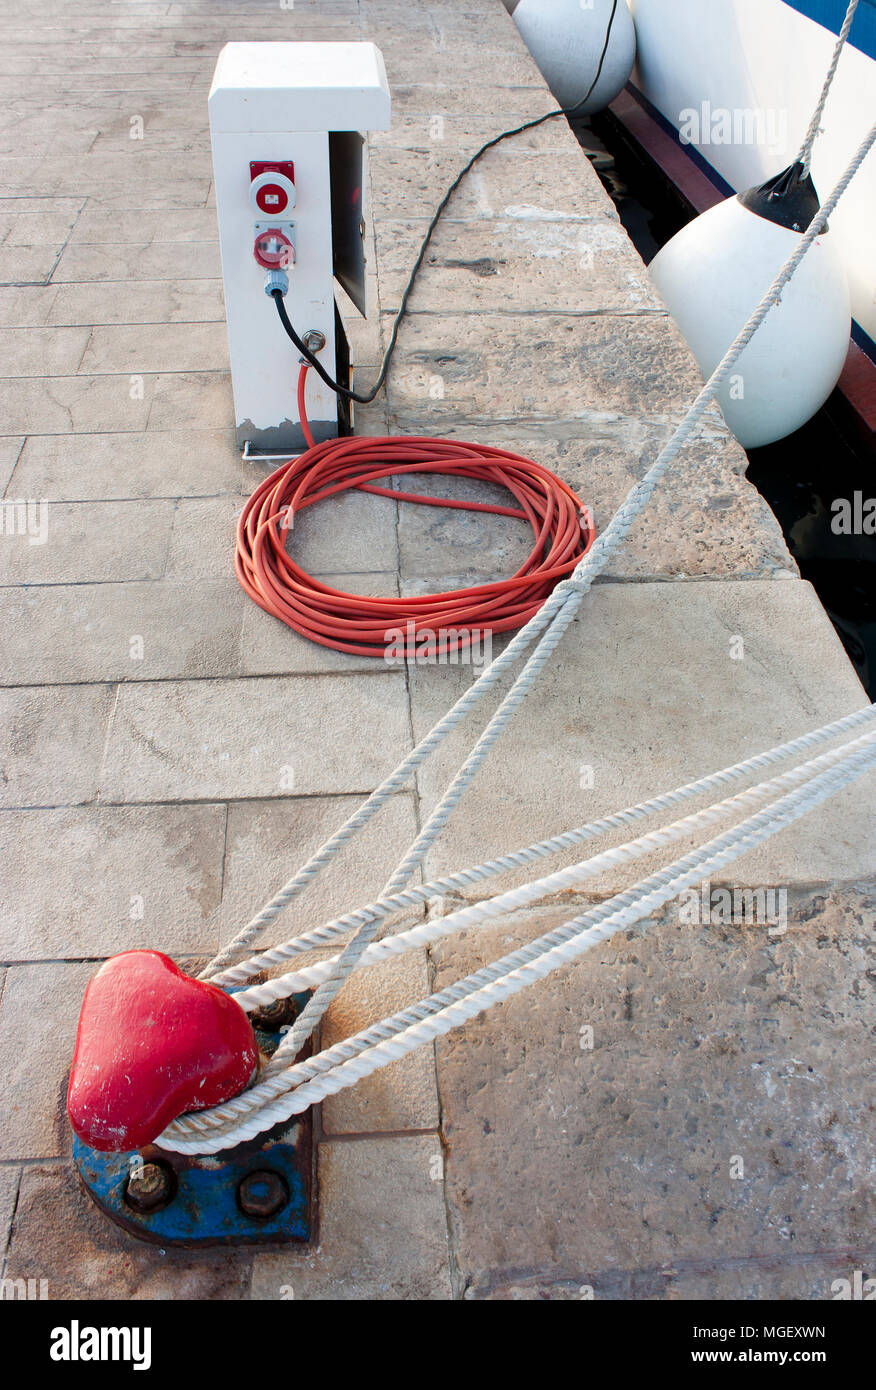 Electrical and water supply pedestal with hose and cable , bitt and a rope on the dock fastened to a boat Stock Photo